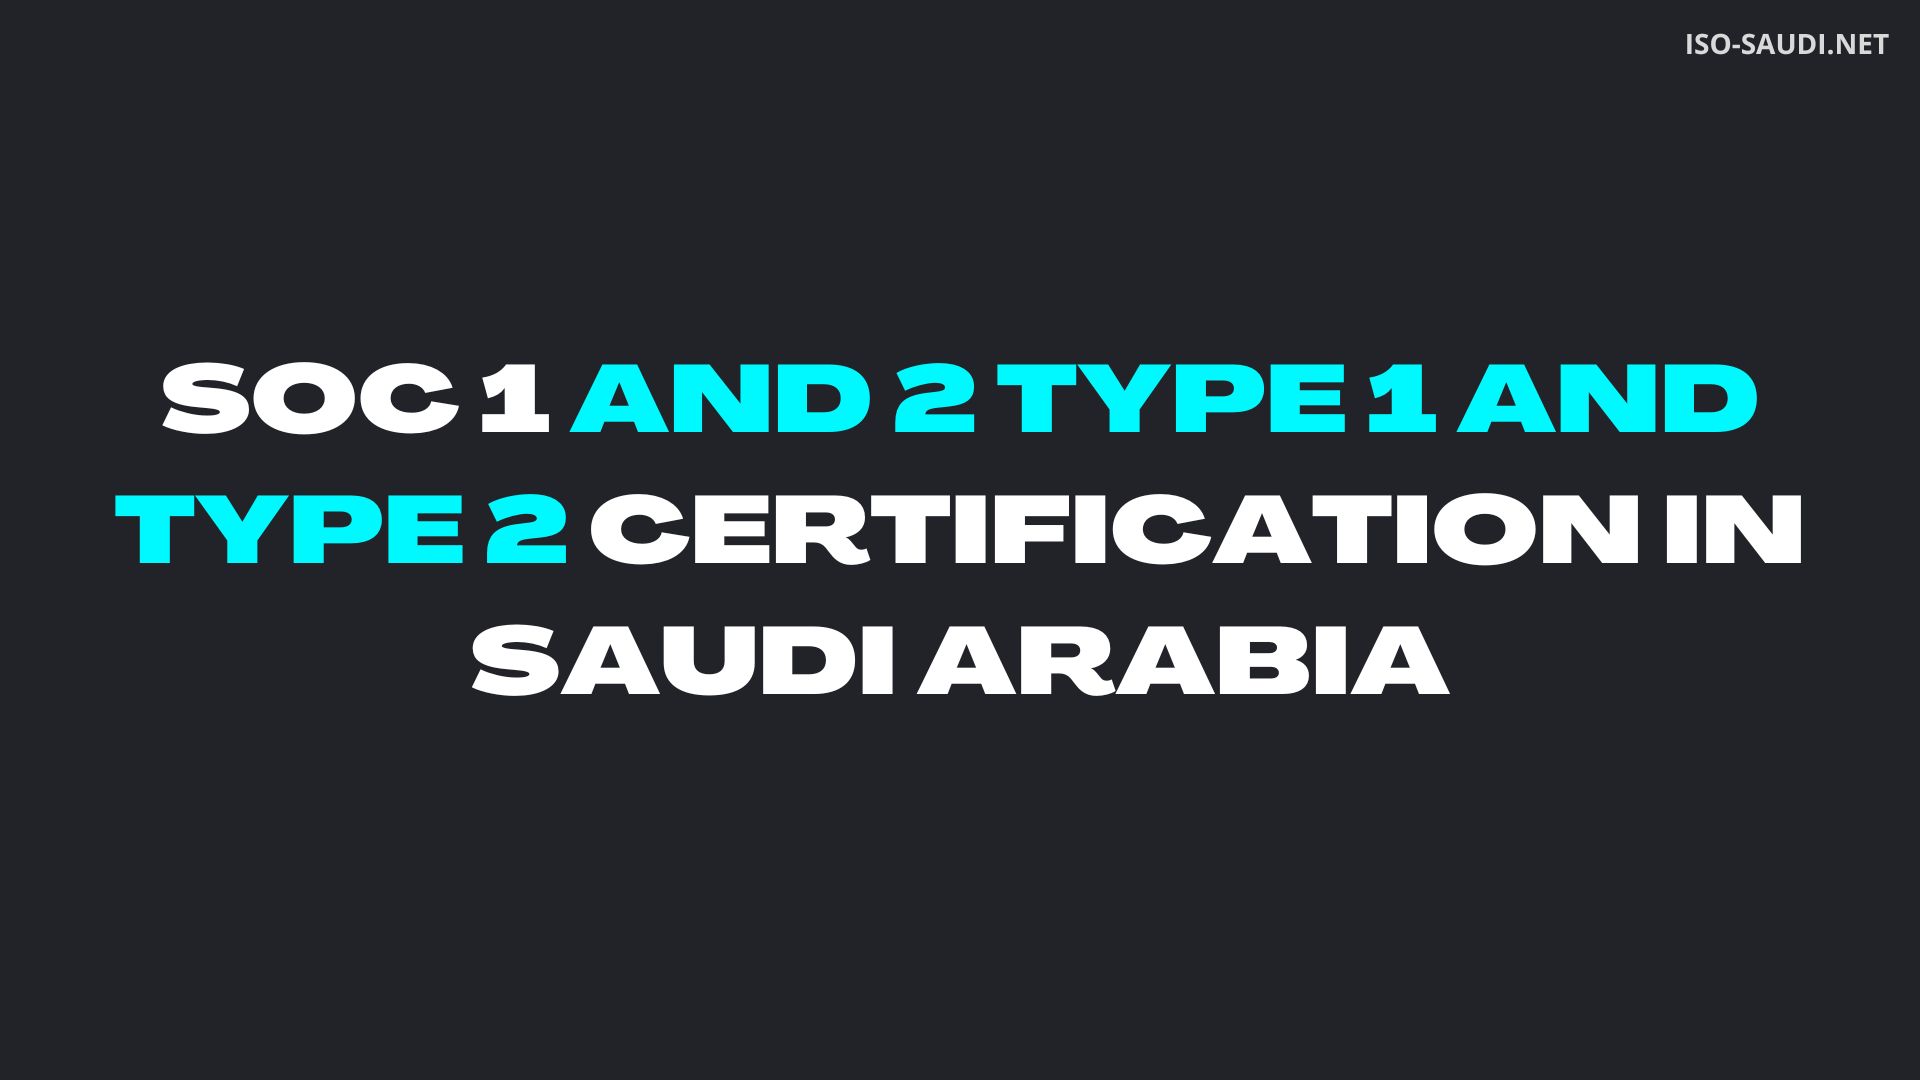 SOC 1 and 2 Type 1 and Type 2 certification IN SAUDI ARABIA